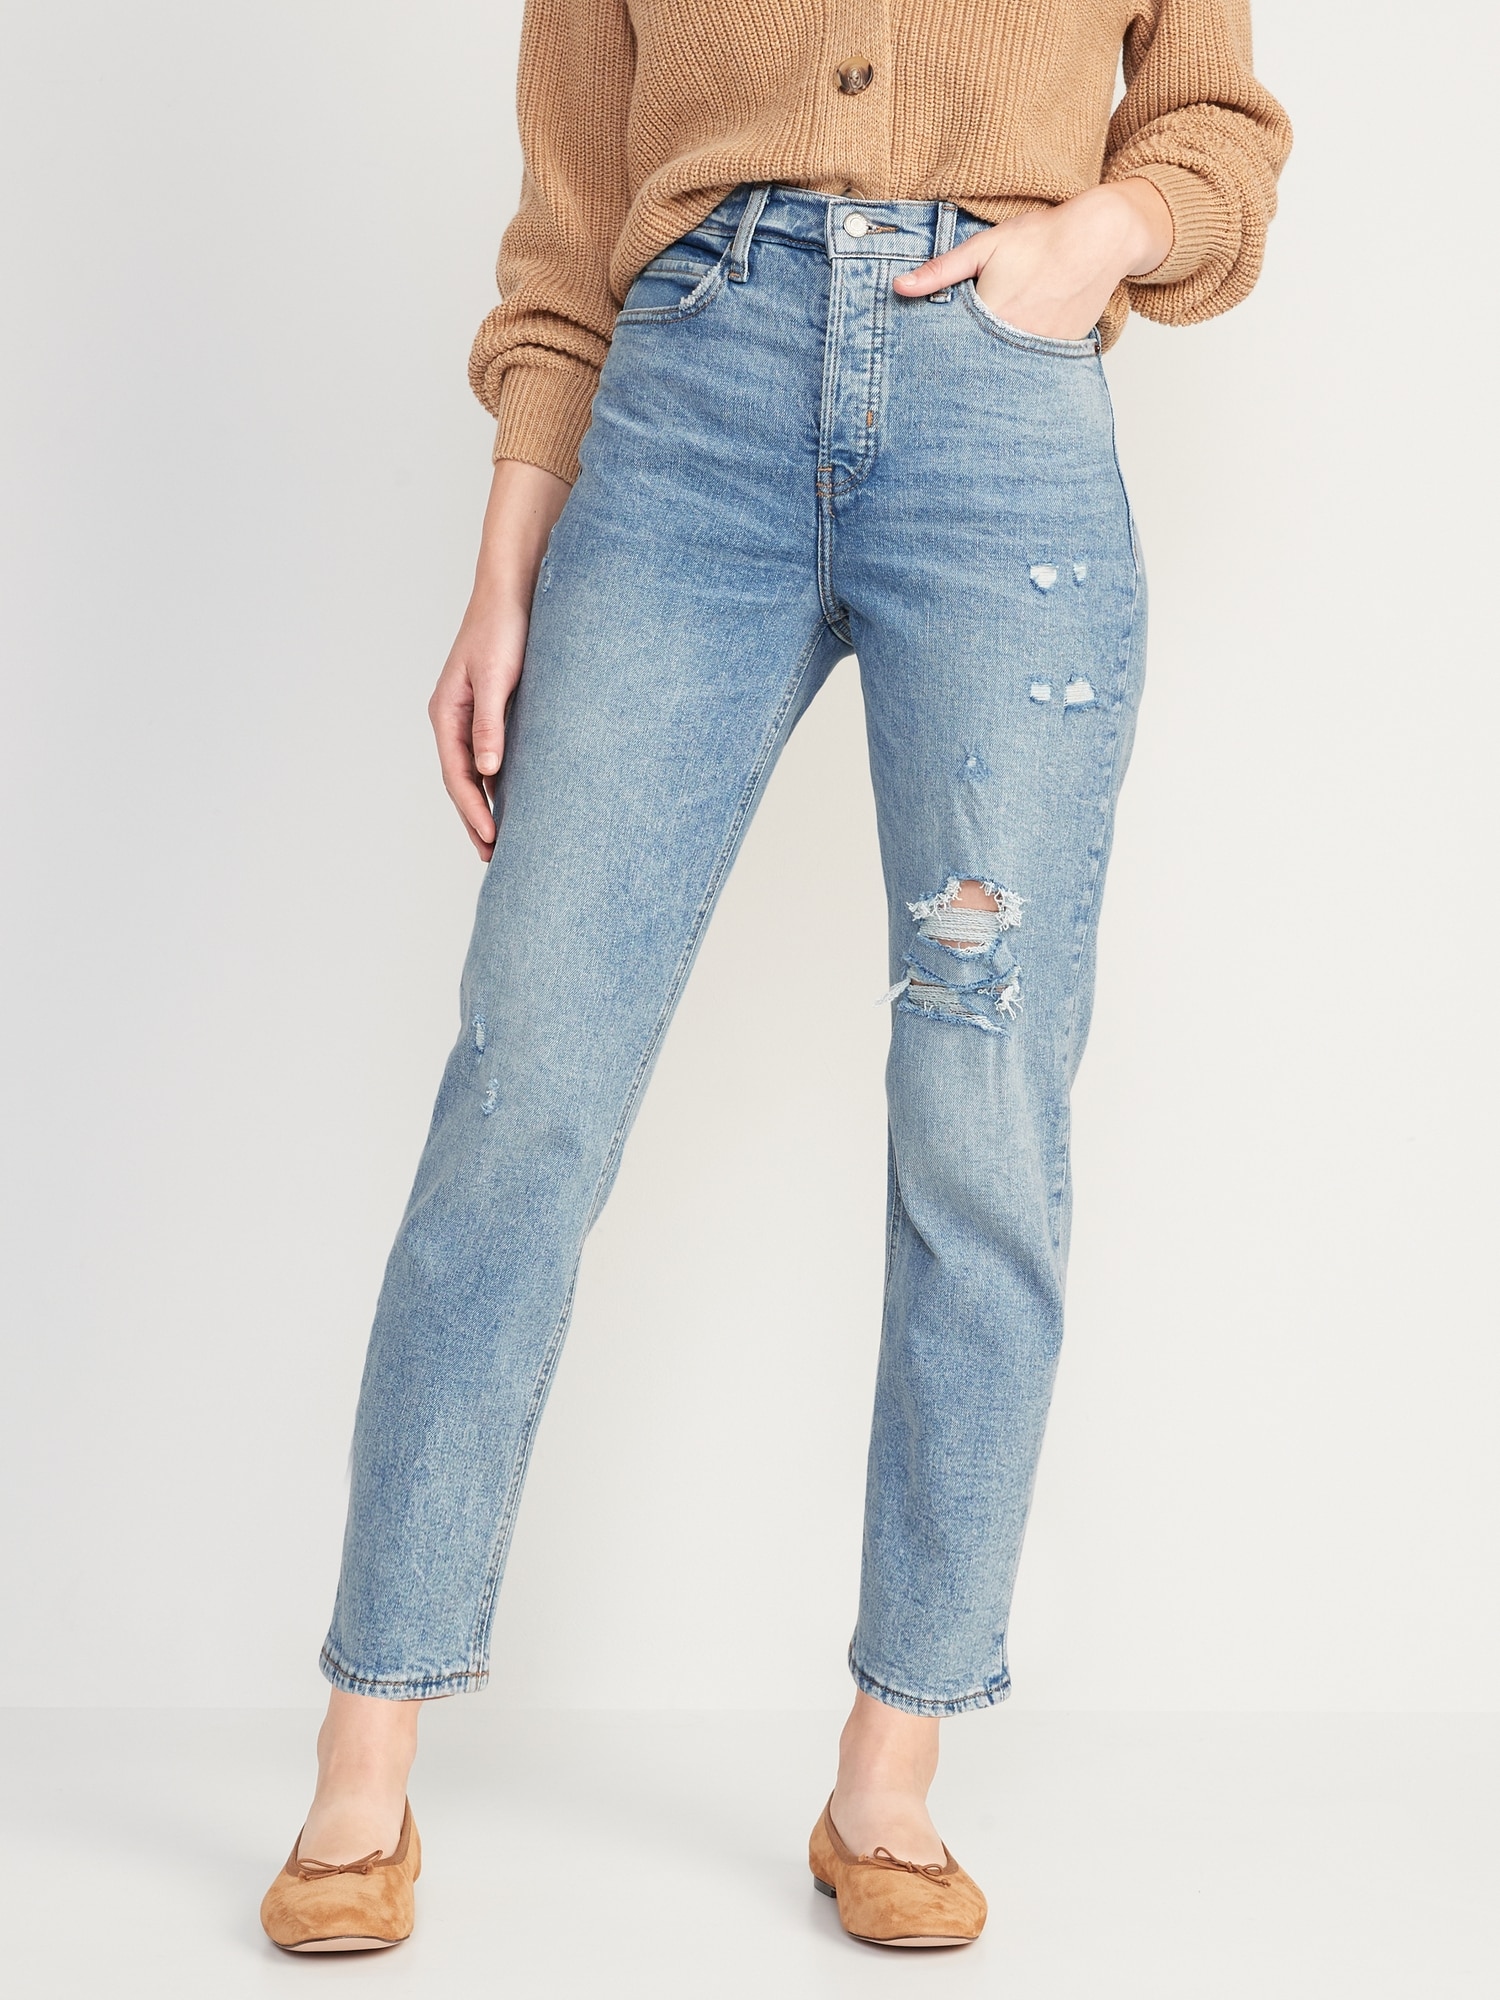 Old Navy Extra High-Waisted Button-Fly Sky-Hi Straight Ripped Jeans for Women blue. 1